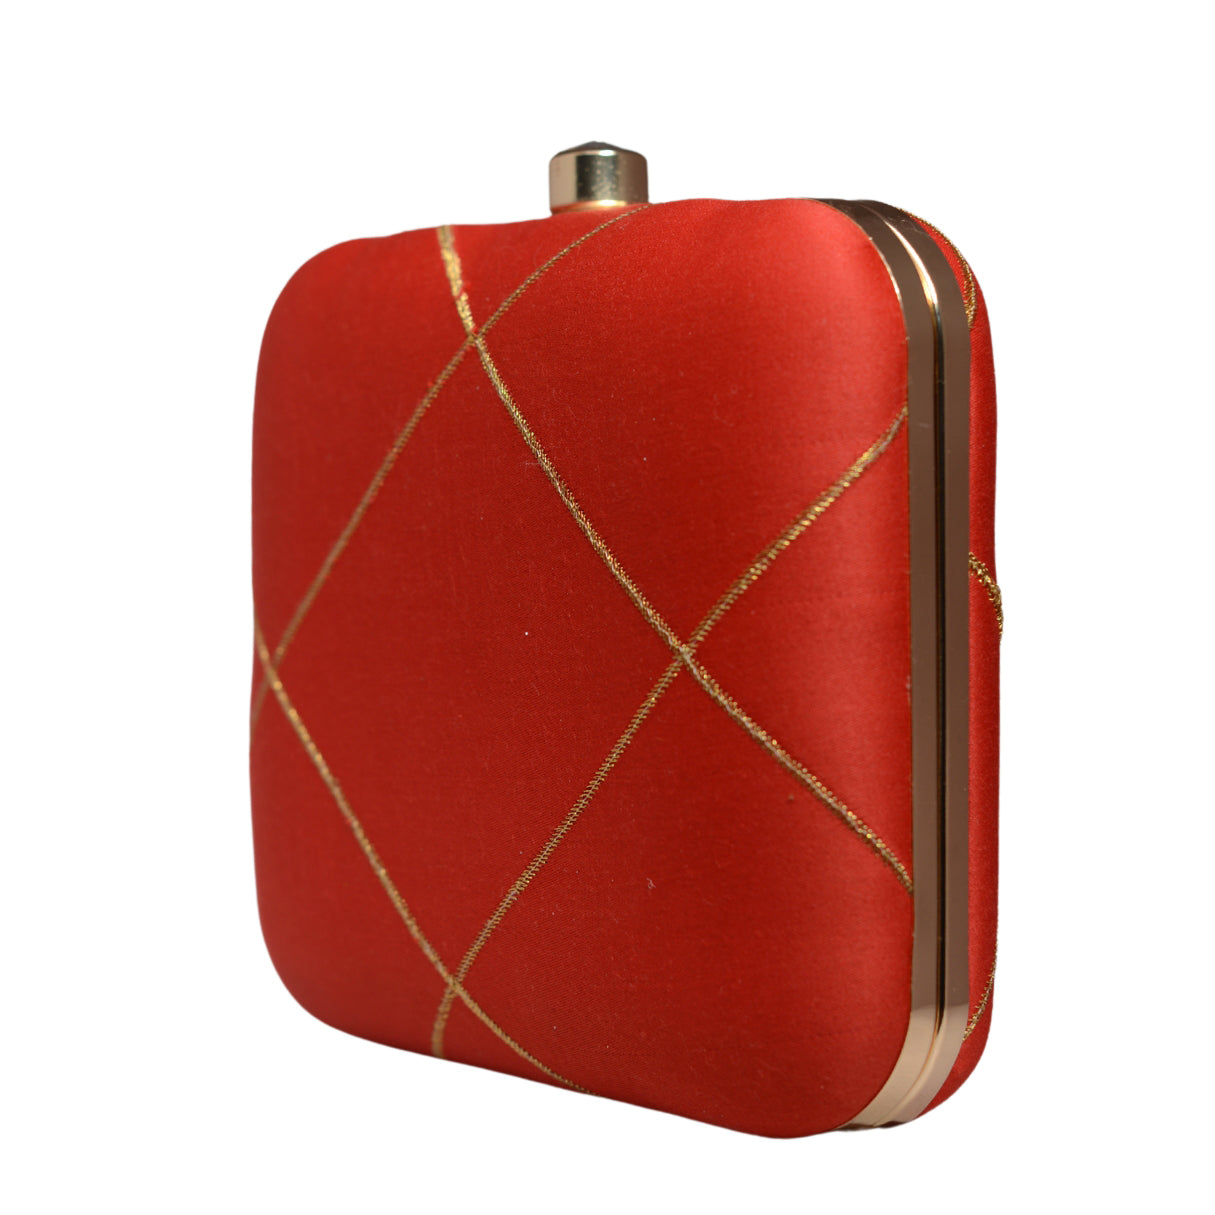 Red And Golden Checks Embroidery Clutch